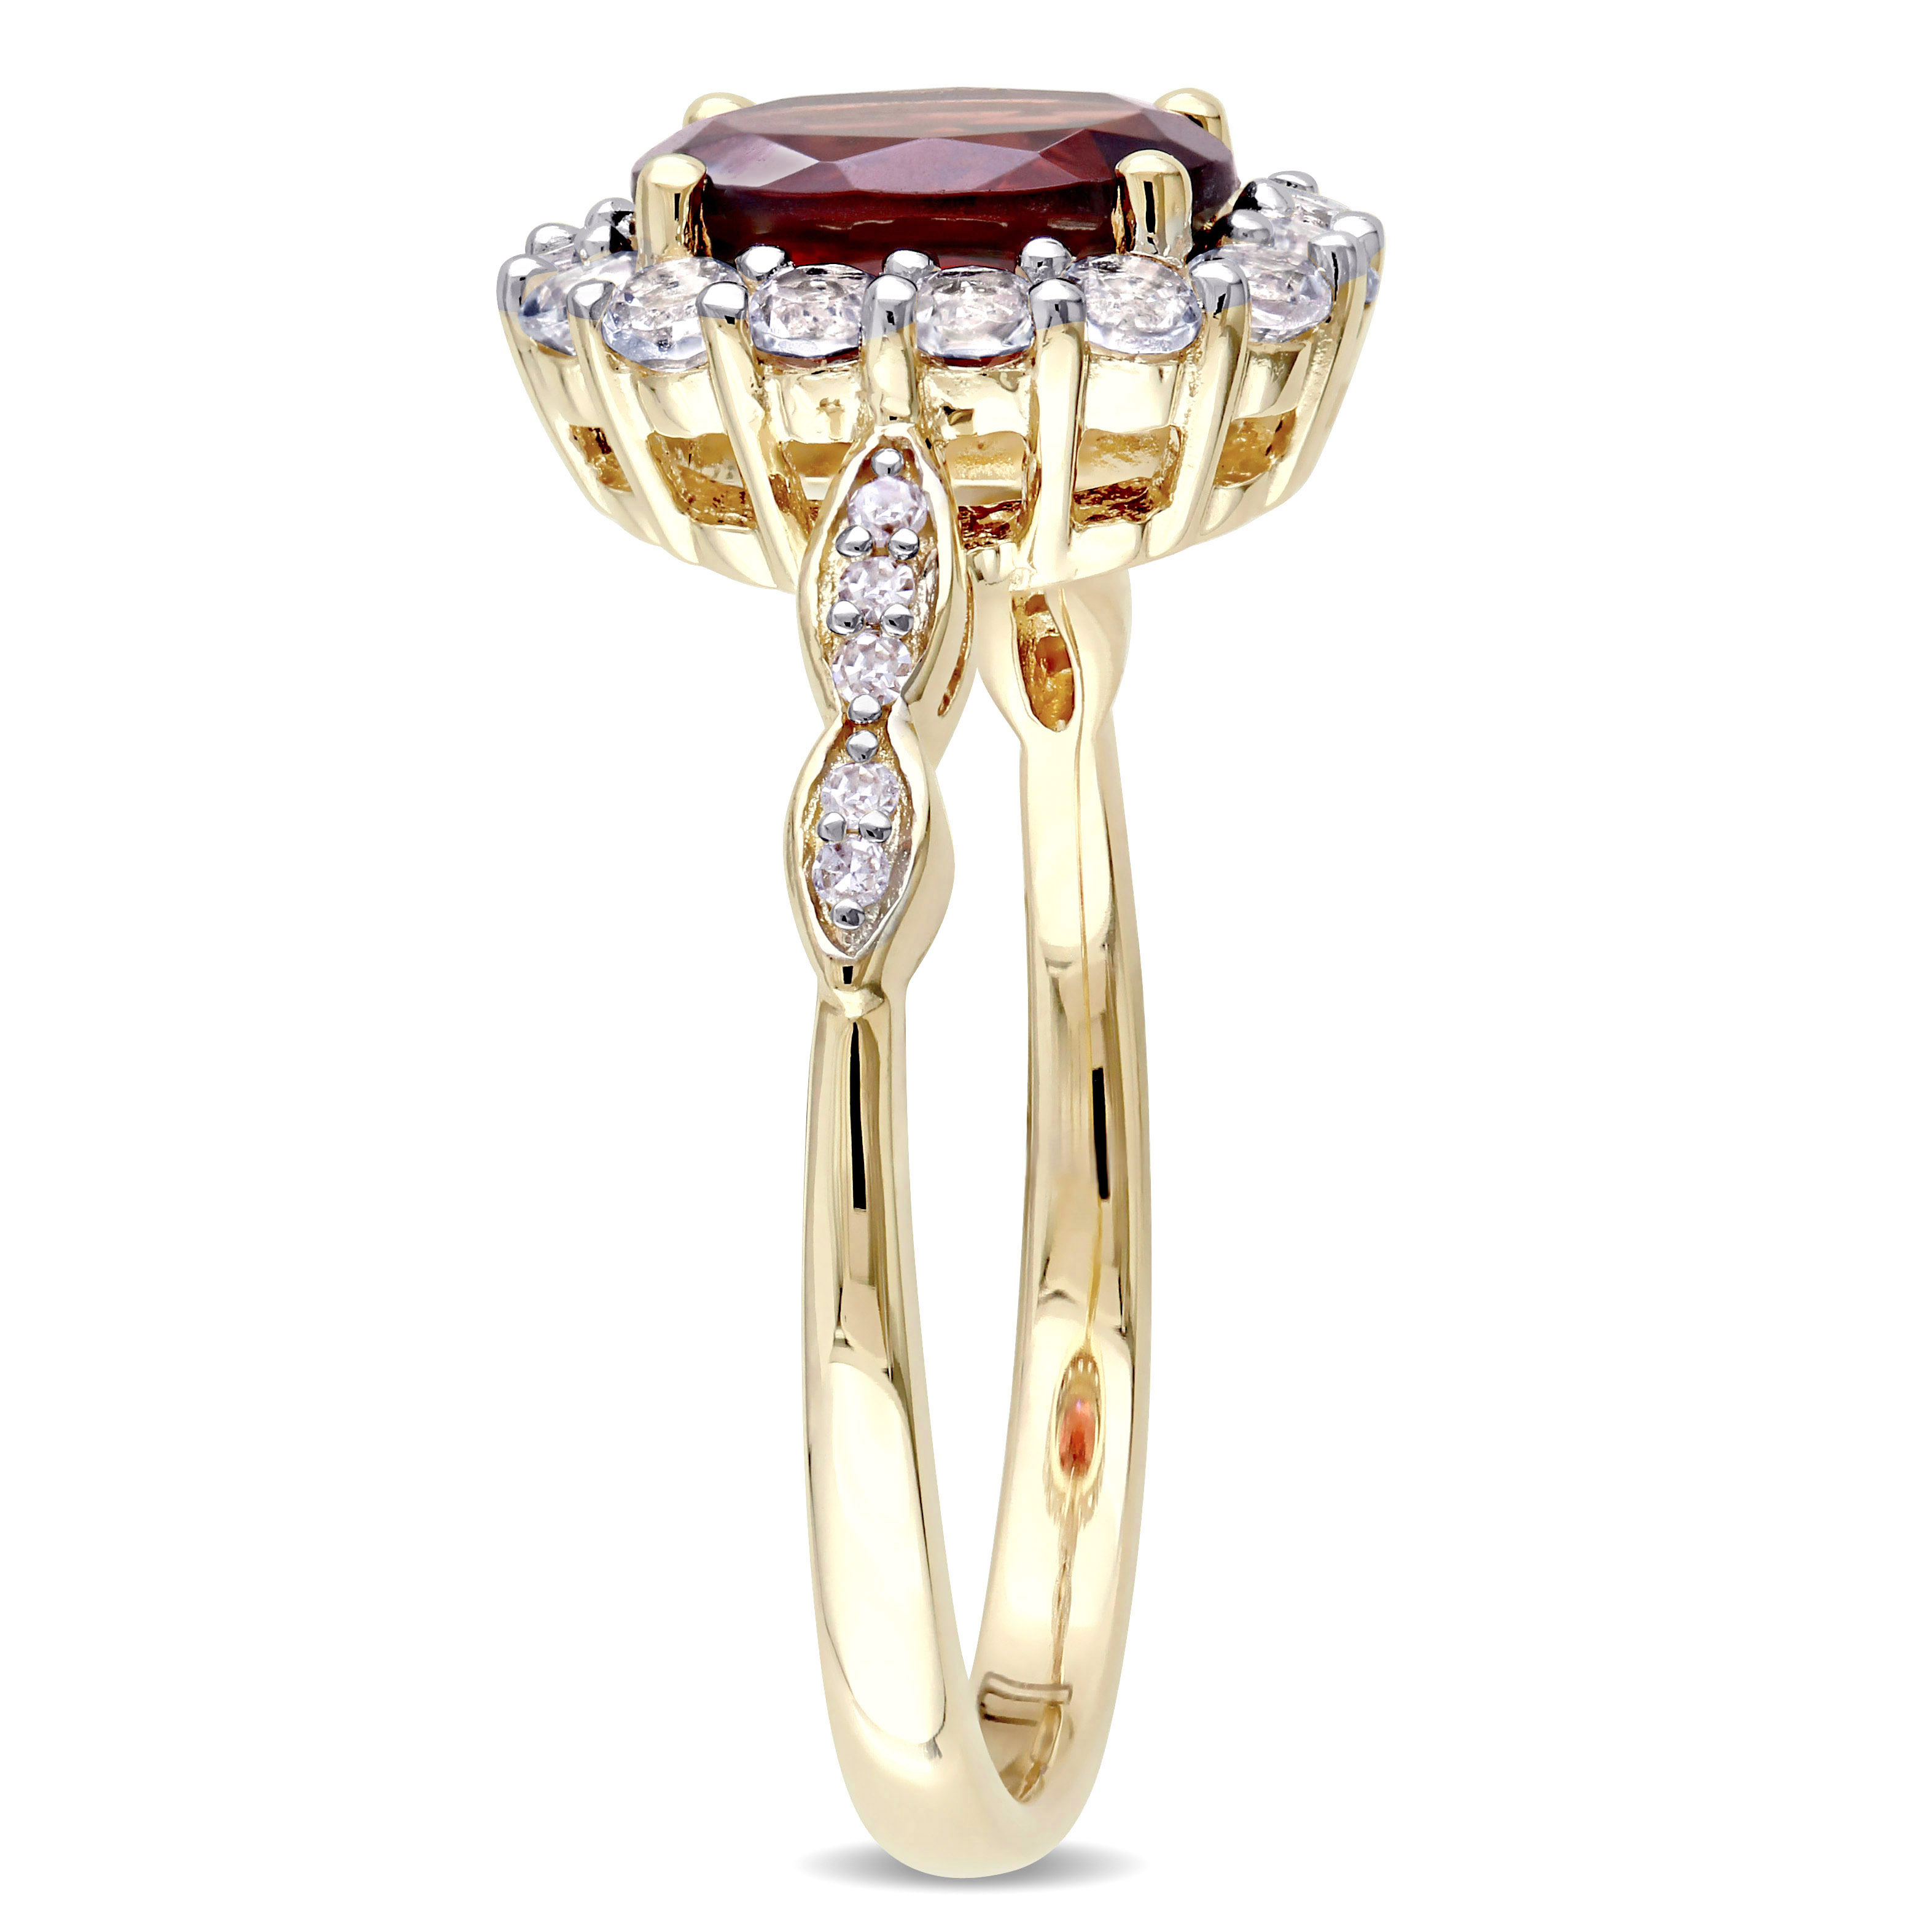 Oval Shape Garnet, White Topaz, and Diamond Accent Vintage Ring in 14k Yellow Gold